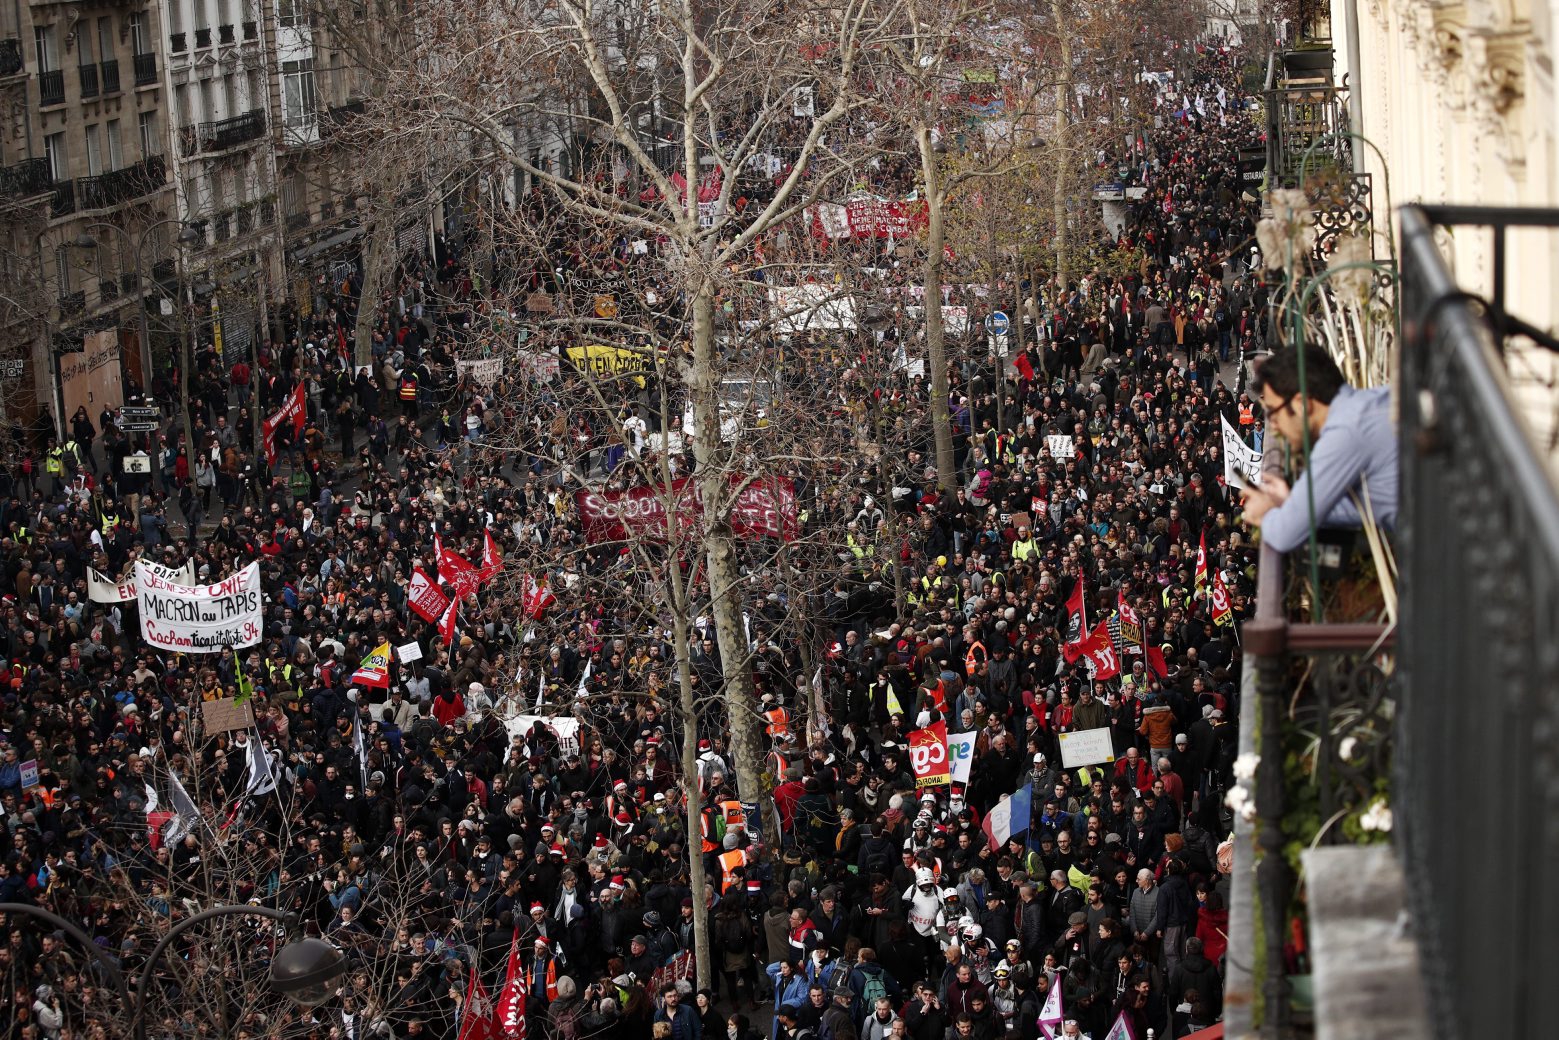 epa08077066 A man looks at the crowd from a balcony as thousands of protesters participate in a demonstration against pension reforms near Republique Square in Paris, France, 17 December 2019. Unions representing railway and transport workers and many others in the public sector have called for a general strike and demonstration to protest against French government's reform of the pension system.  EPA/YOAN VALAT FRANCE GENERAL STRIKE